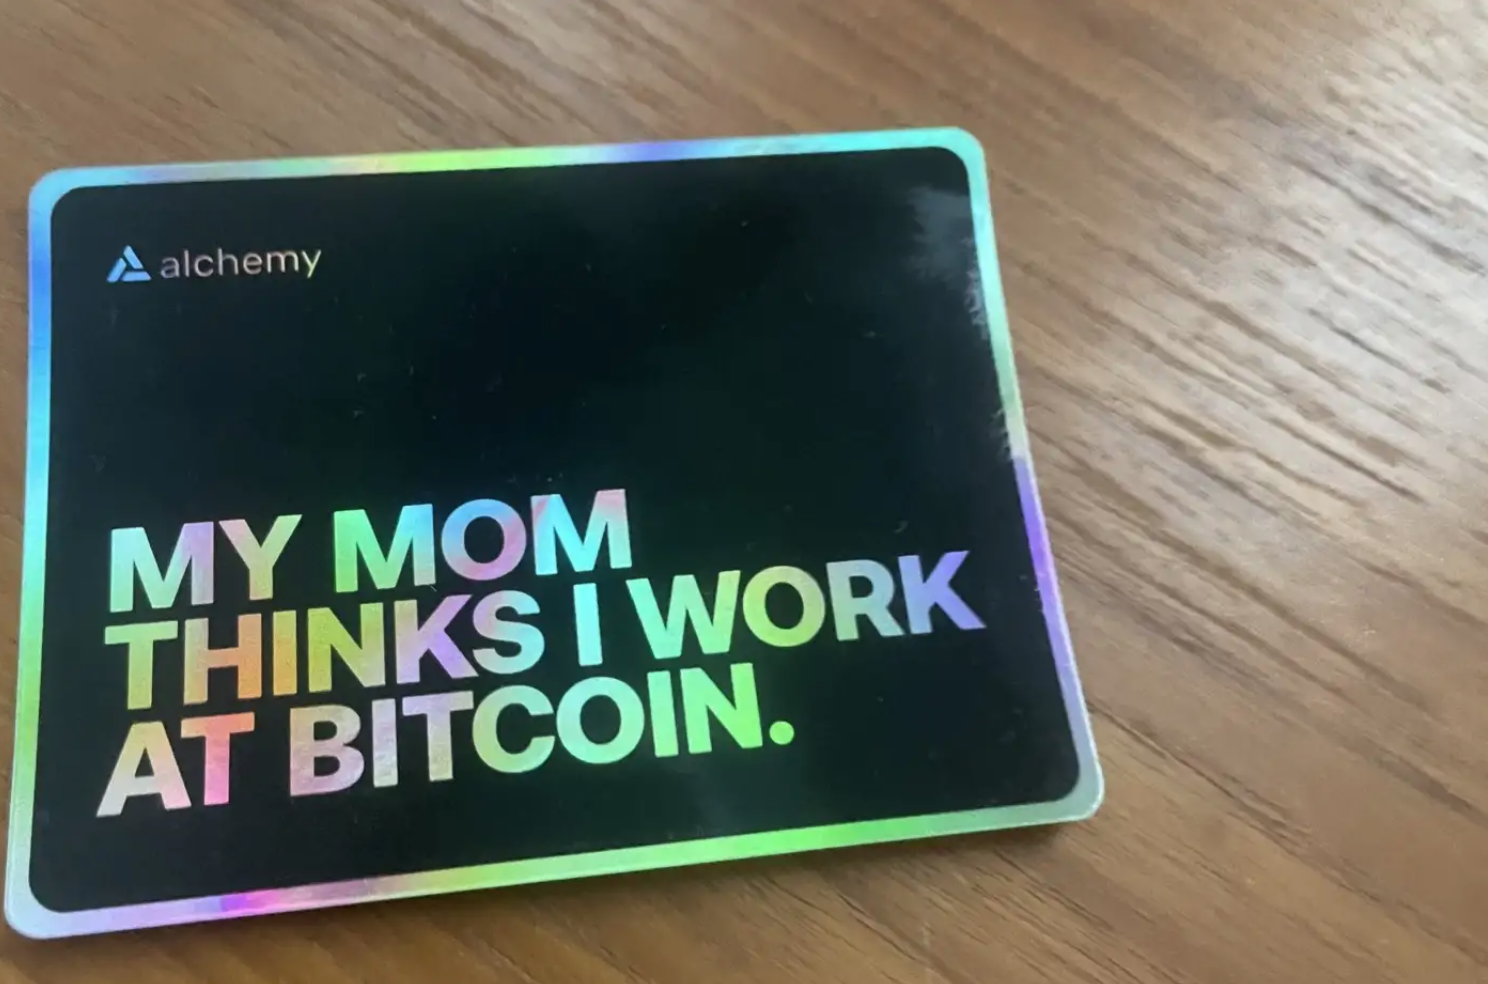 “My mom thinks I work at Bitcoin.” (Spotted at ETH Denver)